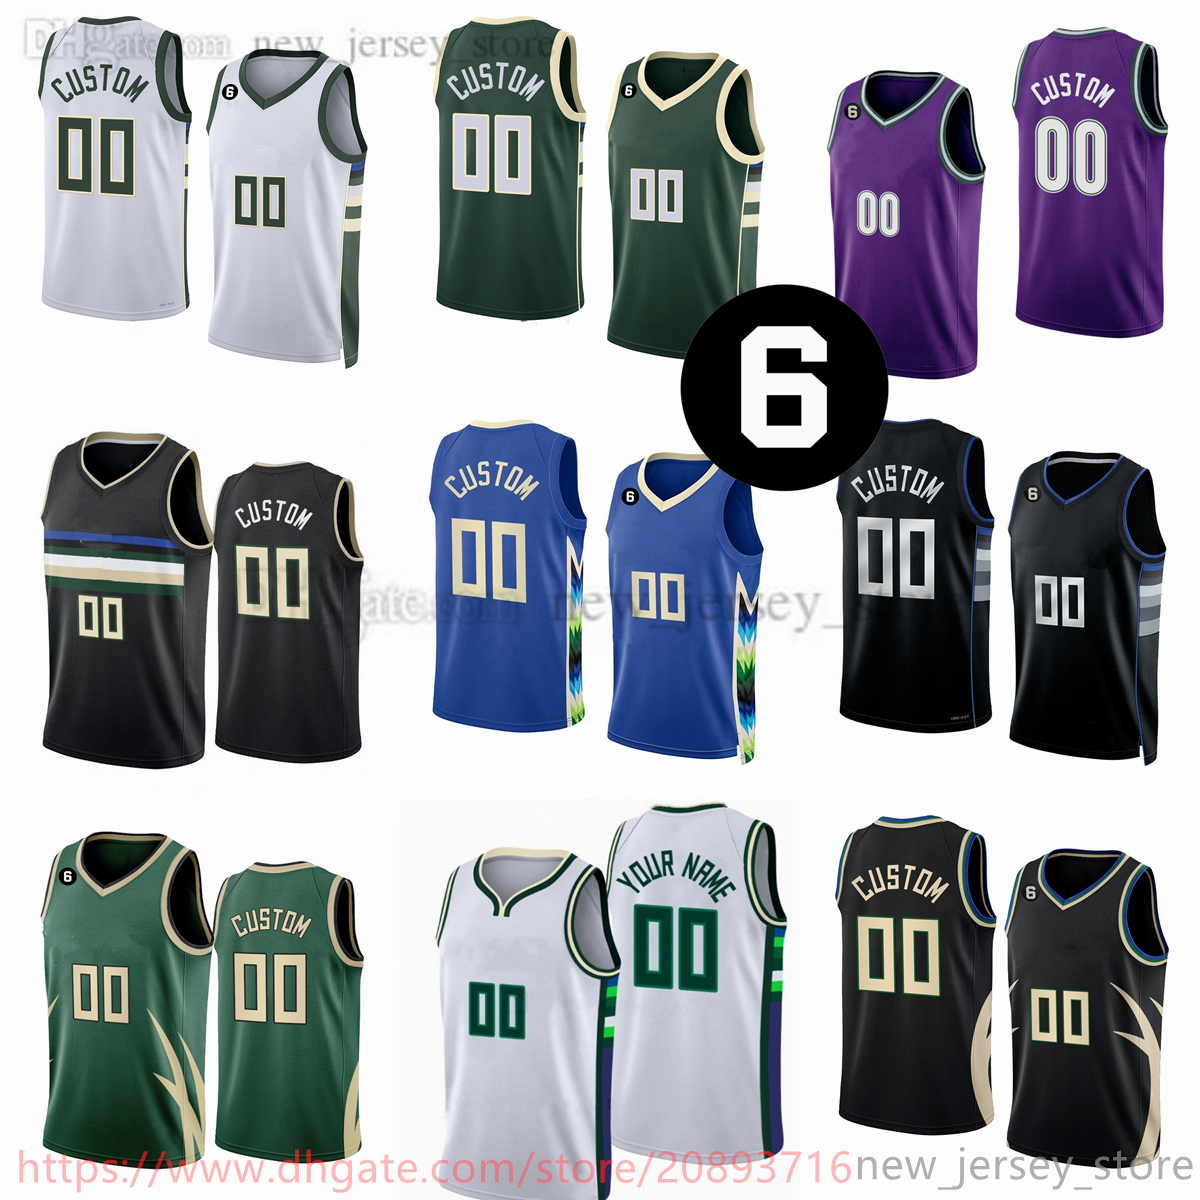 

Custom 2022-23 New season Printed Basketball Jerseys Add 6 patch Green Blue purple White Black Jerseys. Message Any number and name on the order, Printed + 6 patch (with team logo)